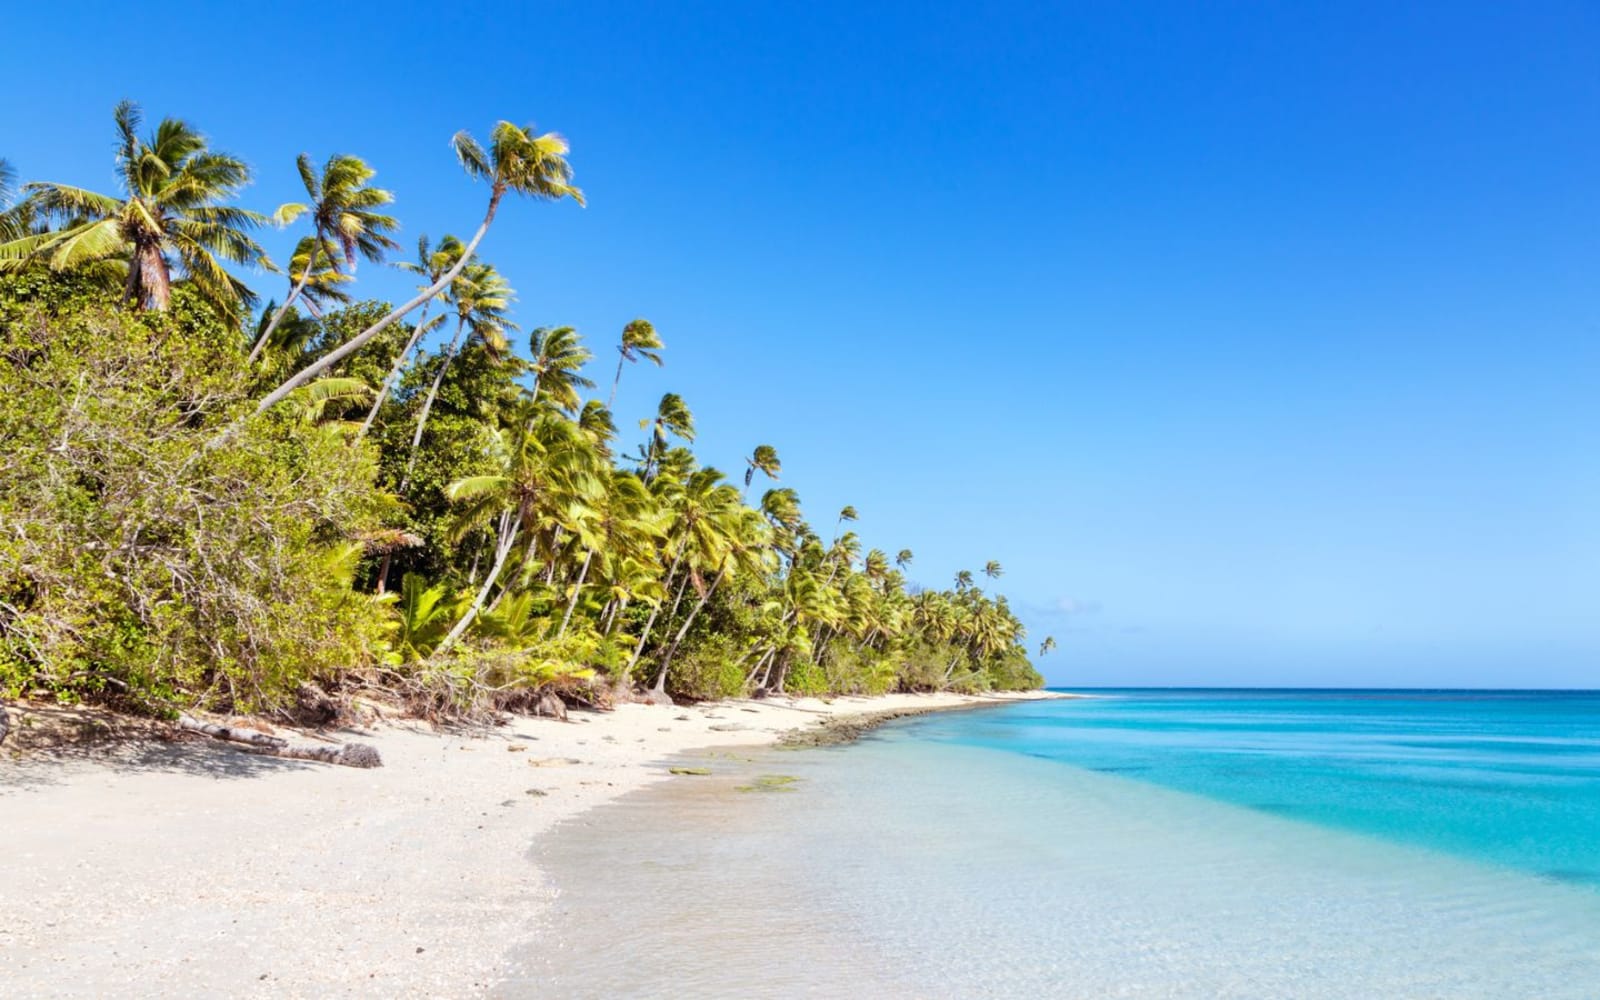 A clean white sandy beach with blue water fringed with palm trees in Fiji